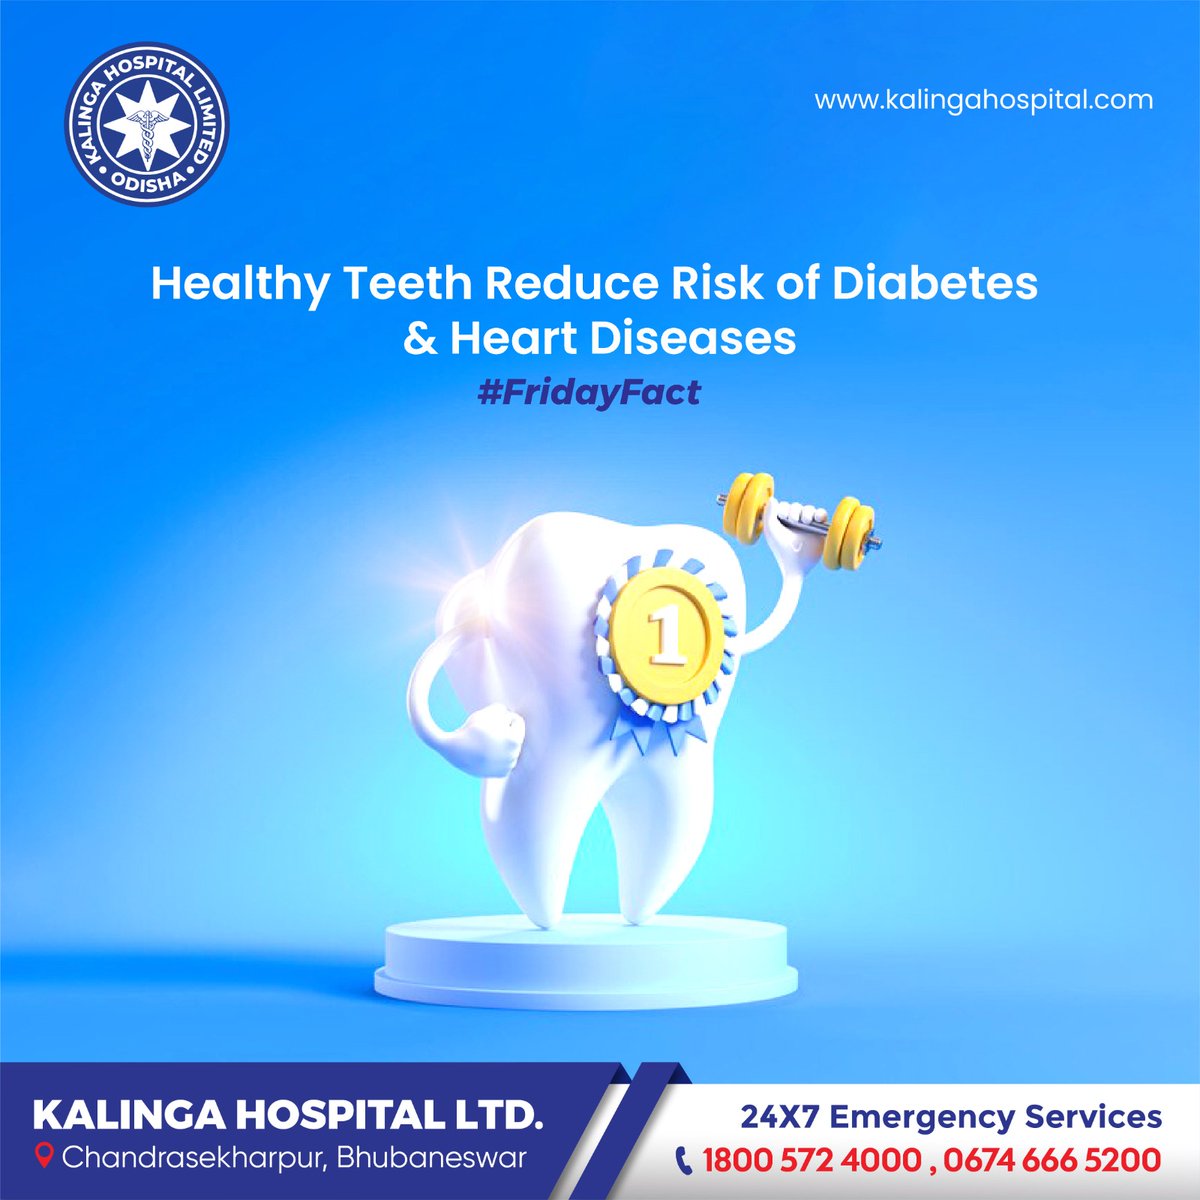 Maintaining good oral hygiene practices & visiting your dentist regularly can help prevent gum disease and reduce the potential impact on your heart and diabetes. 
#OralHealth #DentalCare #HealthySmile  #DentistVisit #DentalCheckup  #OralCareRoutine #FridayFacts #kalingahospital